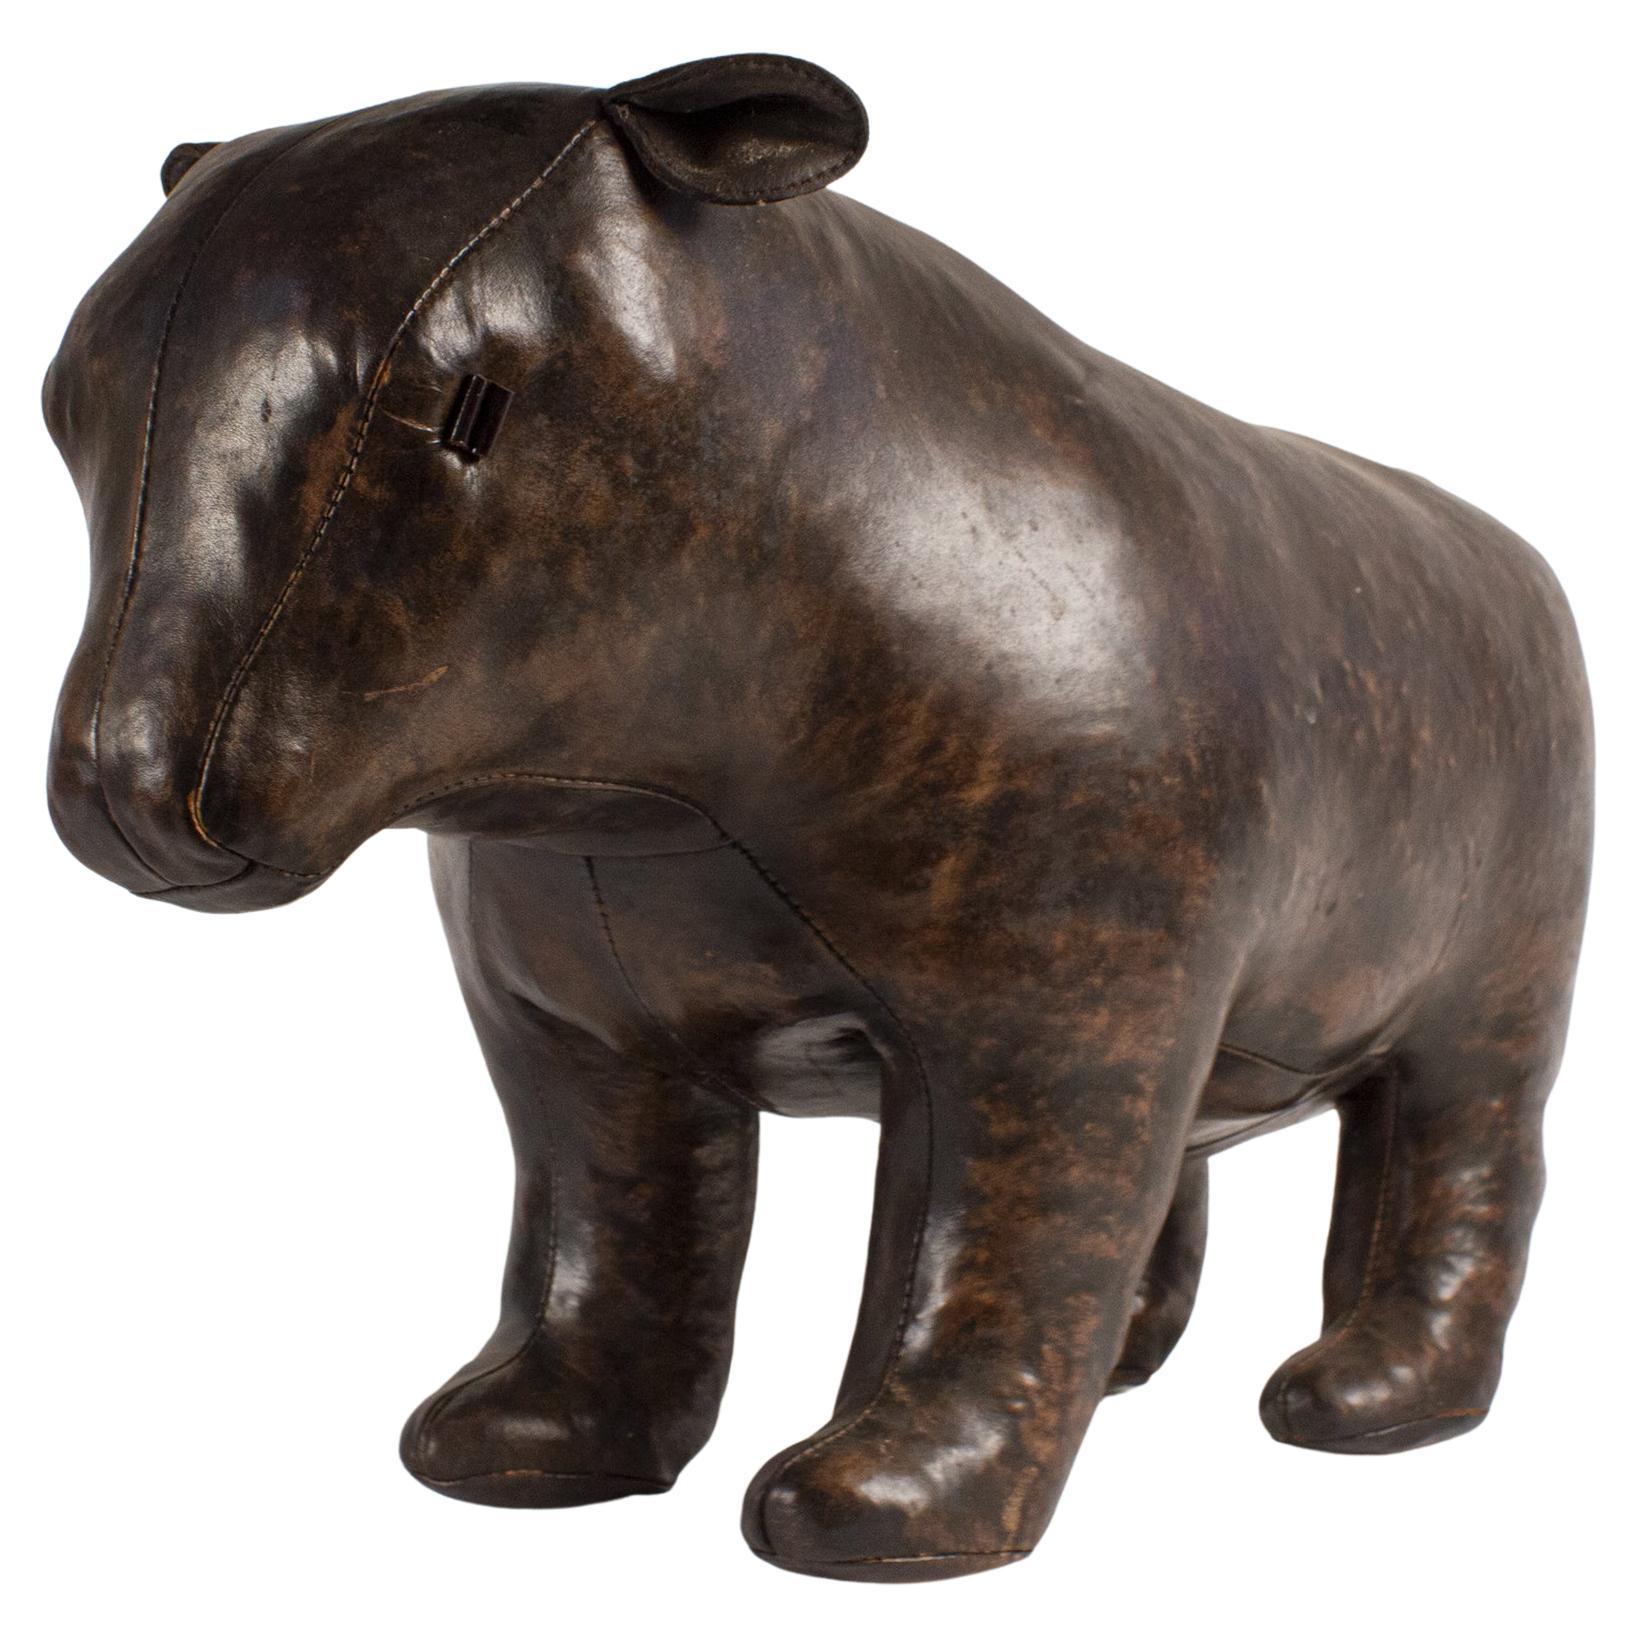 Omersa Bear Sculpture / Footstool in Leather By Dimitri Omersa